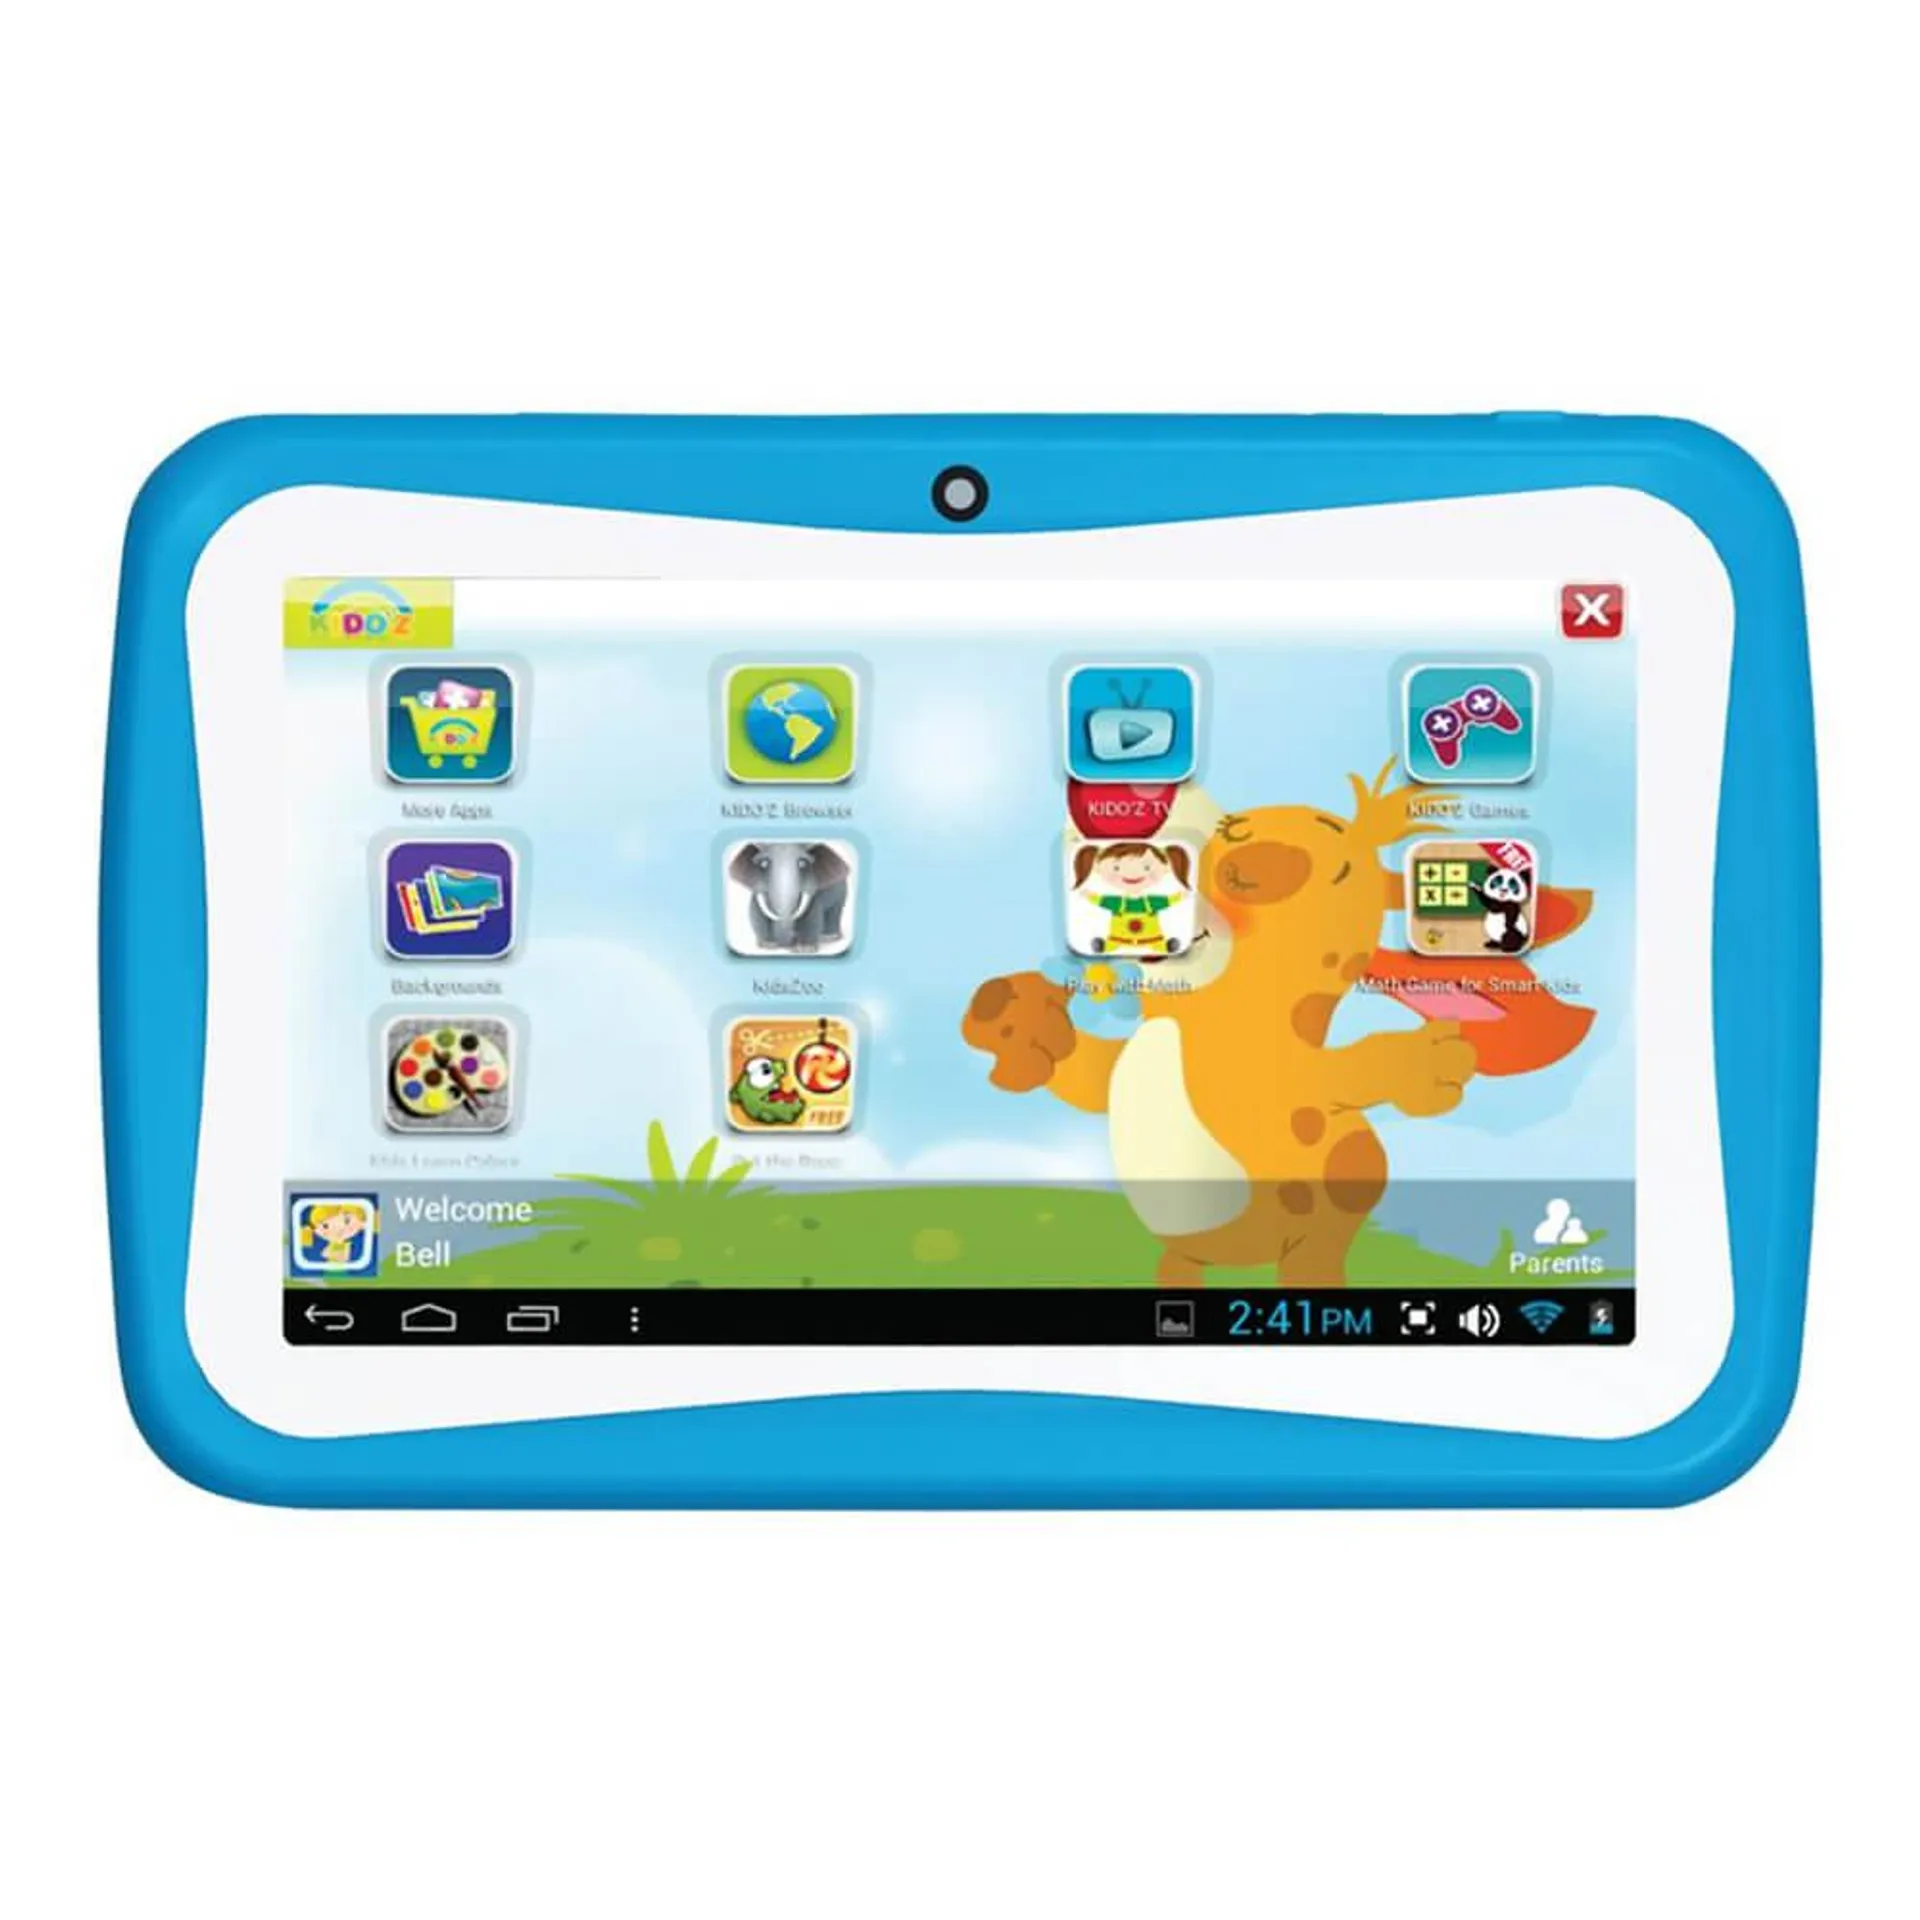 Munchkins Android Tablet - Blue - OPEN BOX